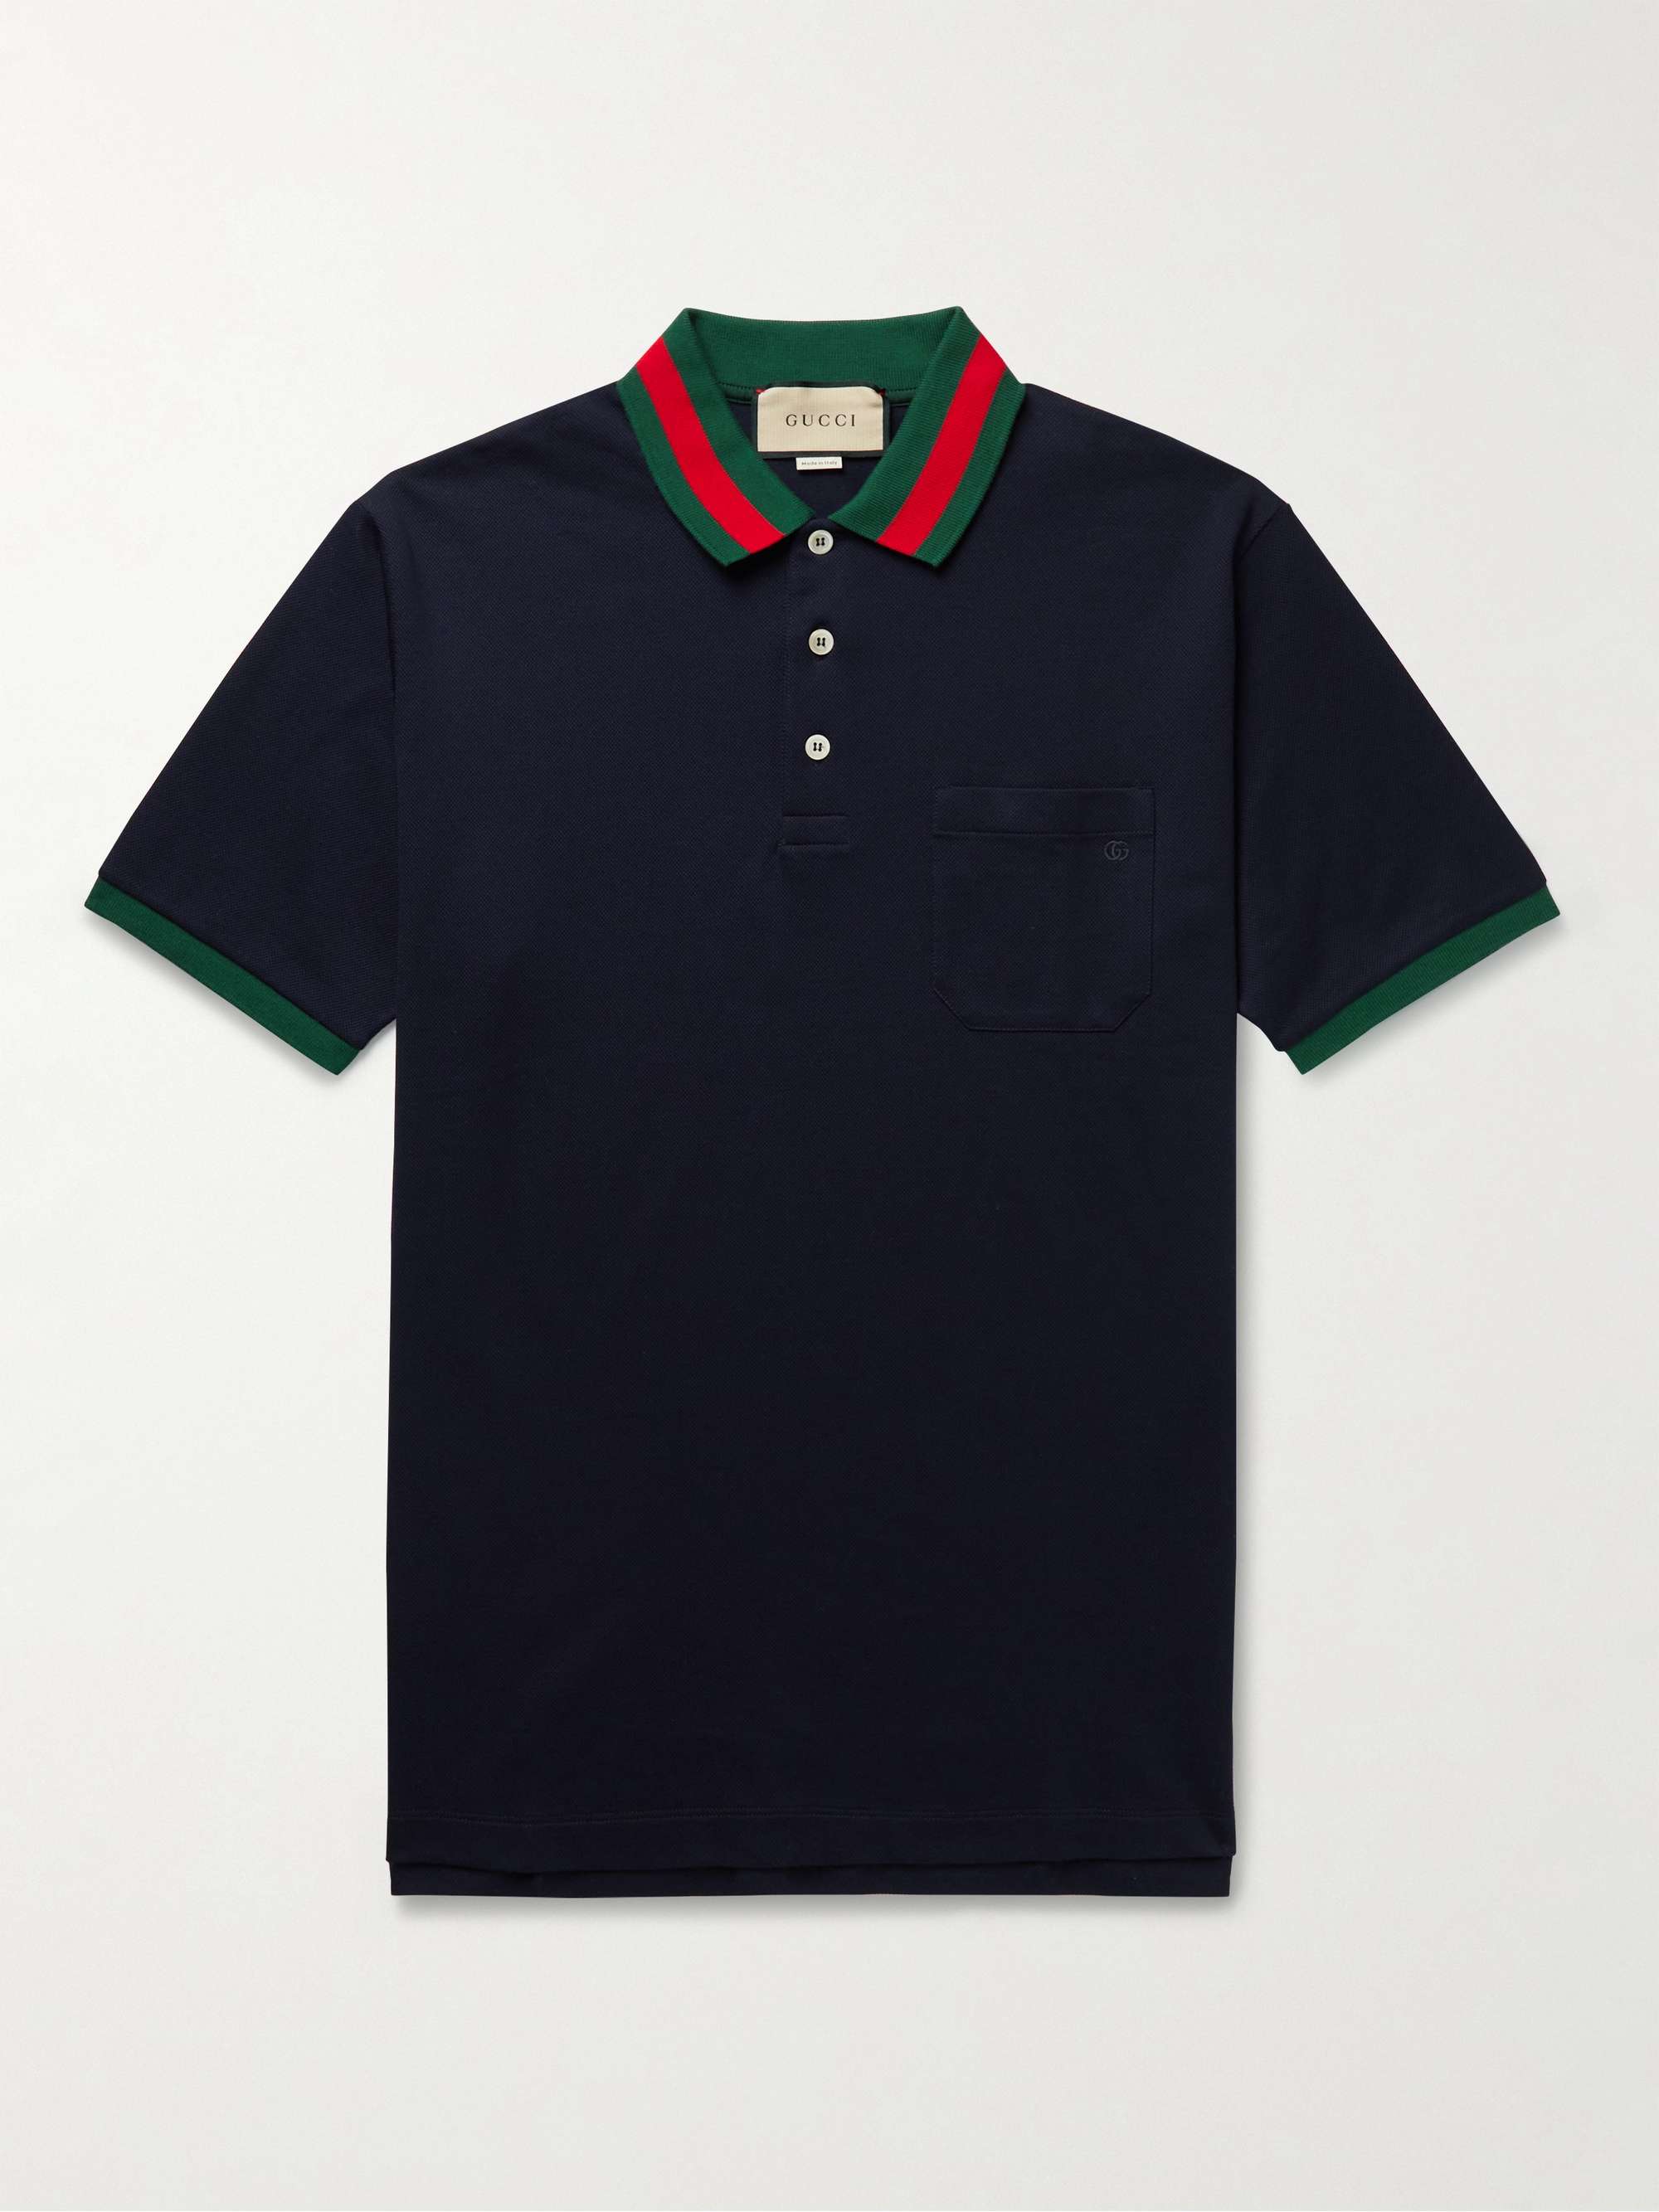 jazz Maladroit Dated Navy Logo-Embroidered Stretch-Cotton Piqué Polo Shirt | GUCCI | MR PORTER